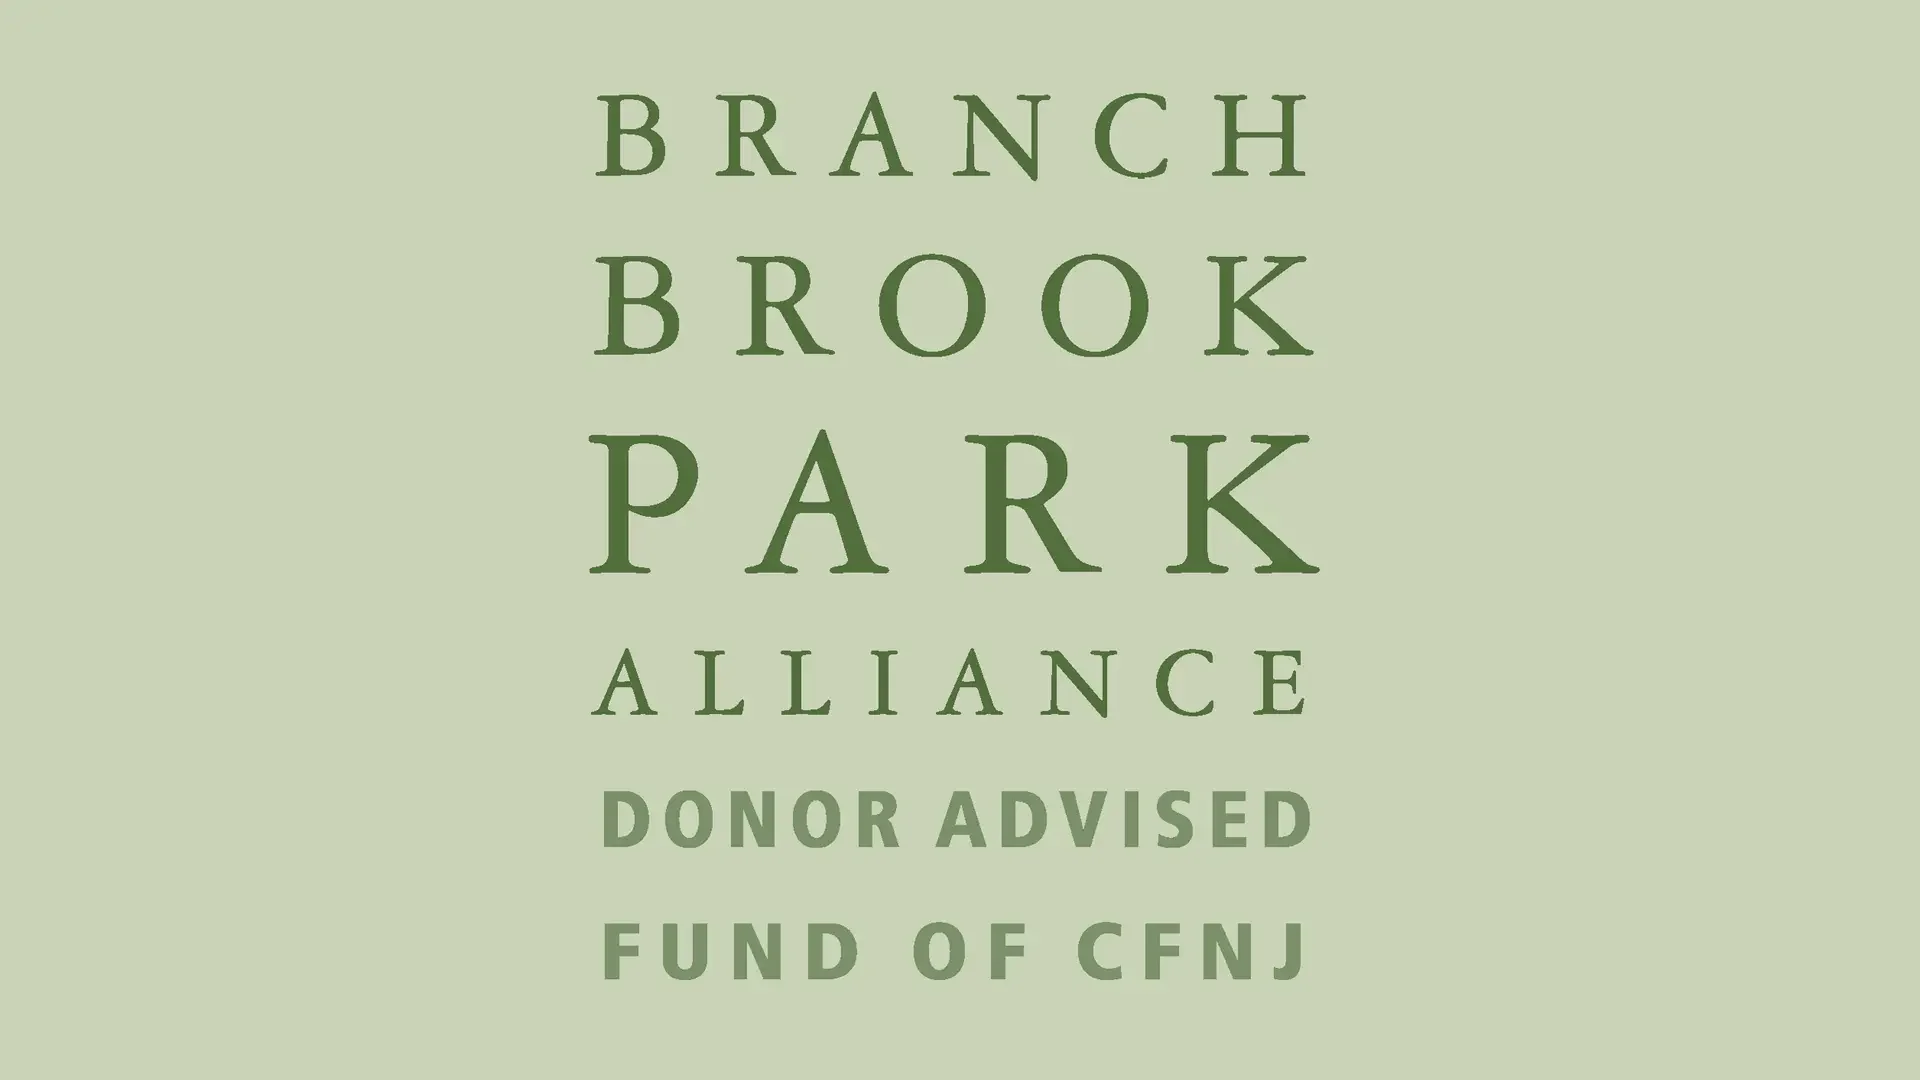 Branch Brook Park Alliance Donor Advised Fund of CFNJ